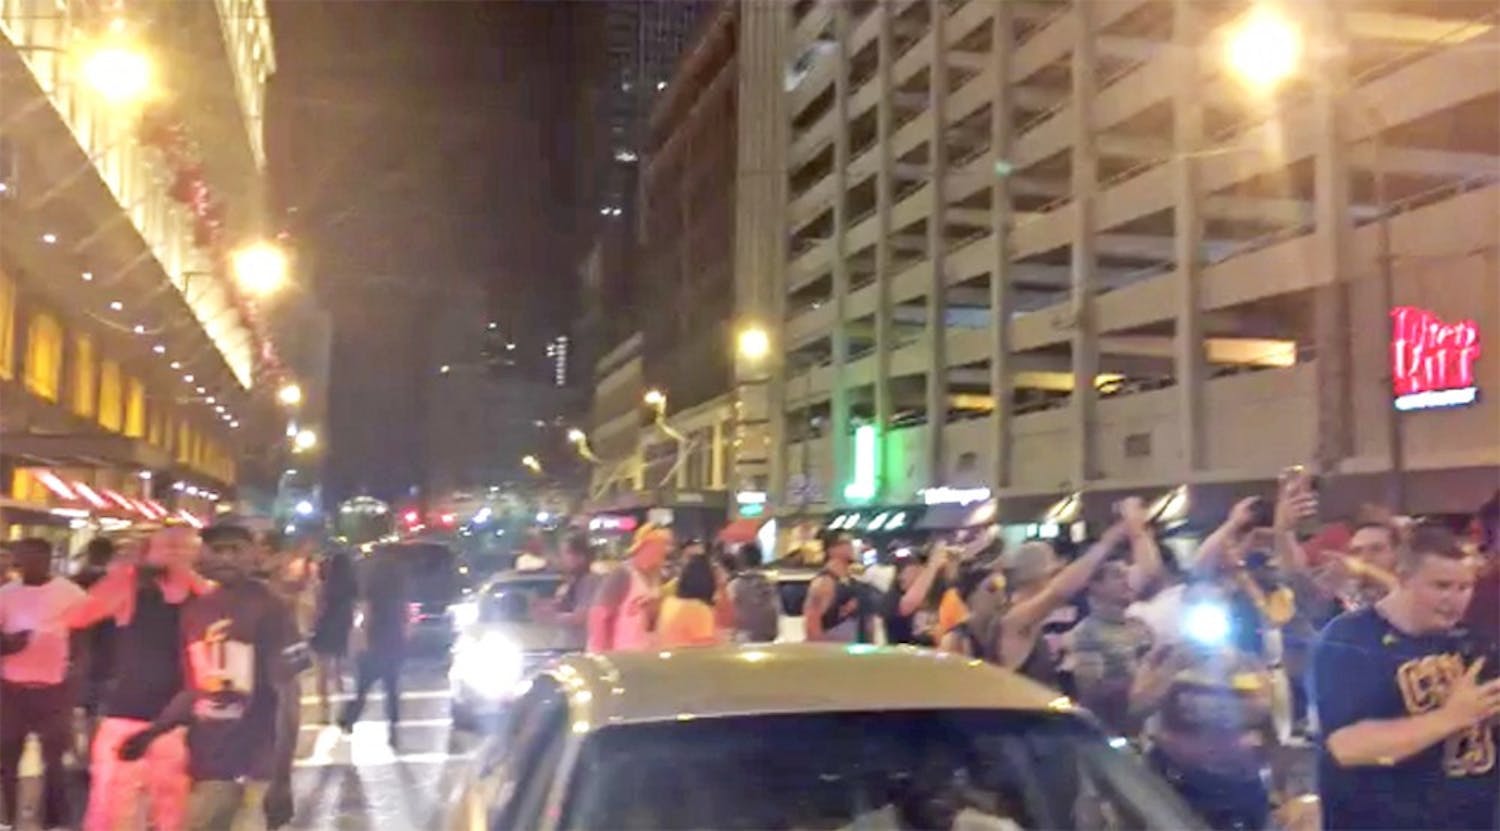 Clevelanders celebrated in the streets outside of Quicken Loans Arena after the Cleveland Cavaliers won Game 7 of the NBA Finals.